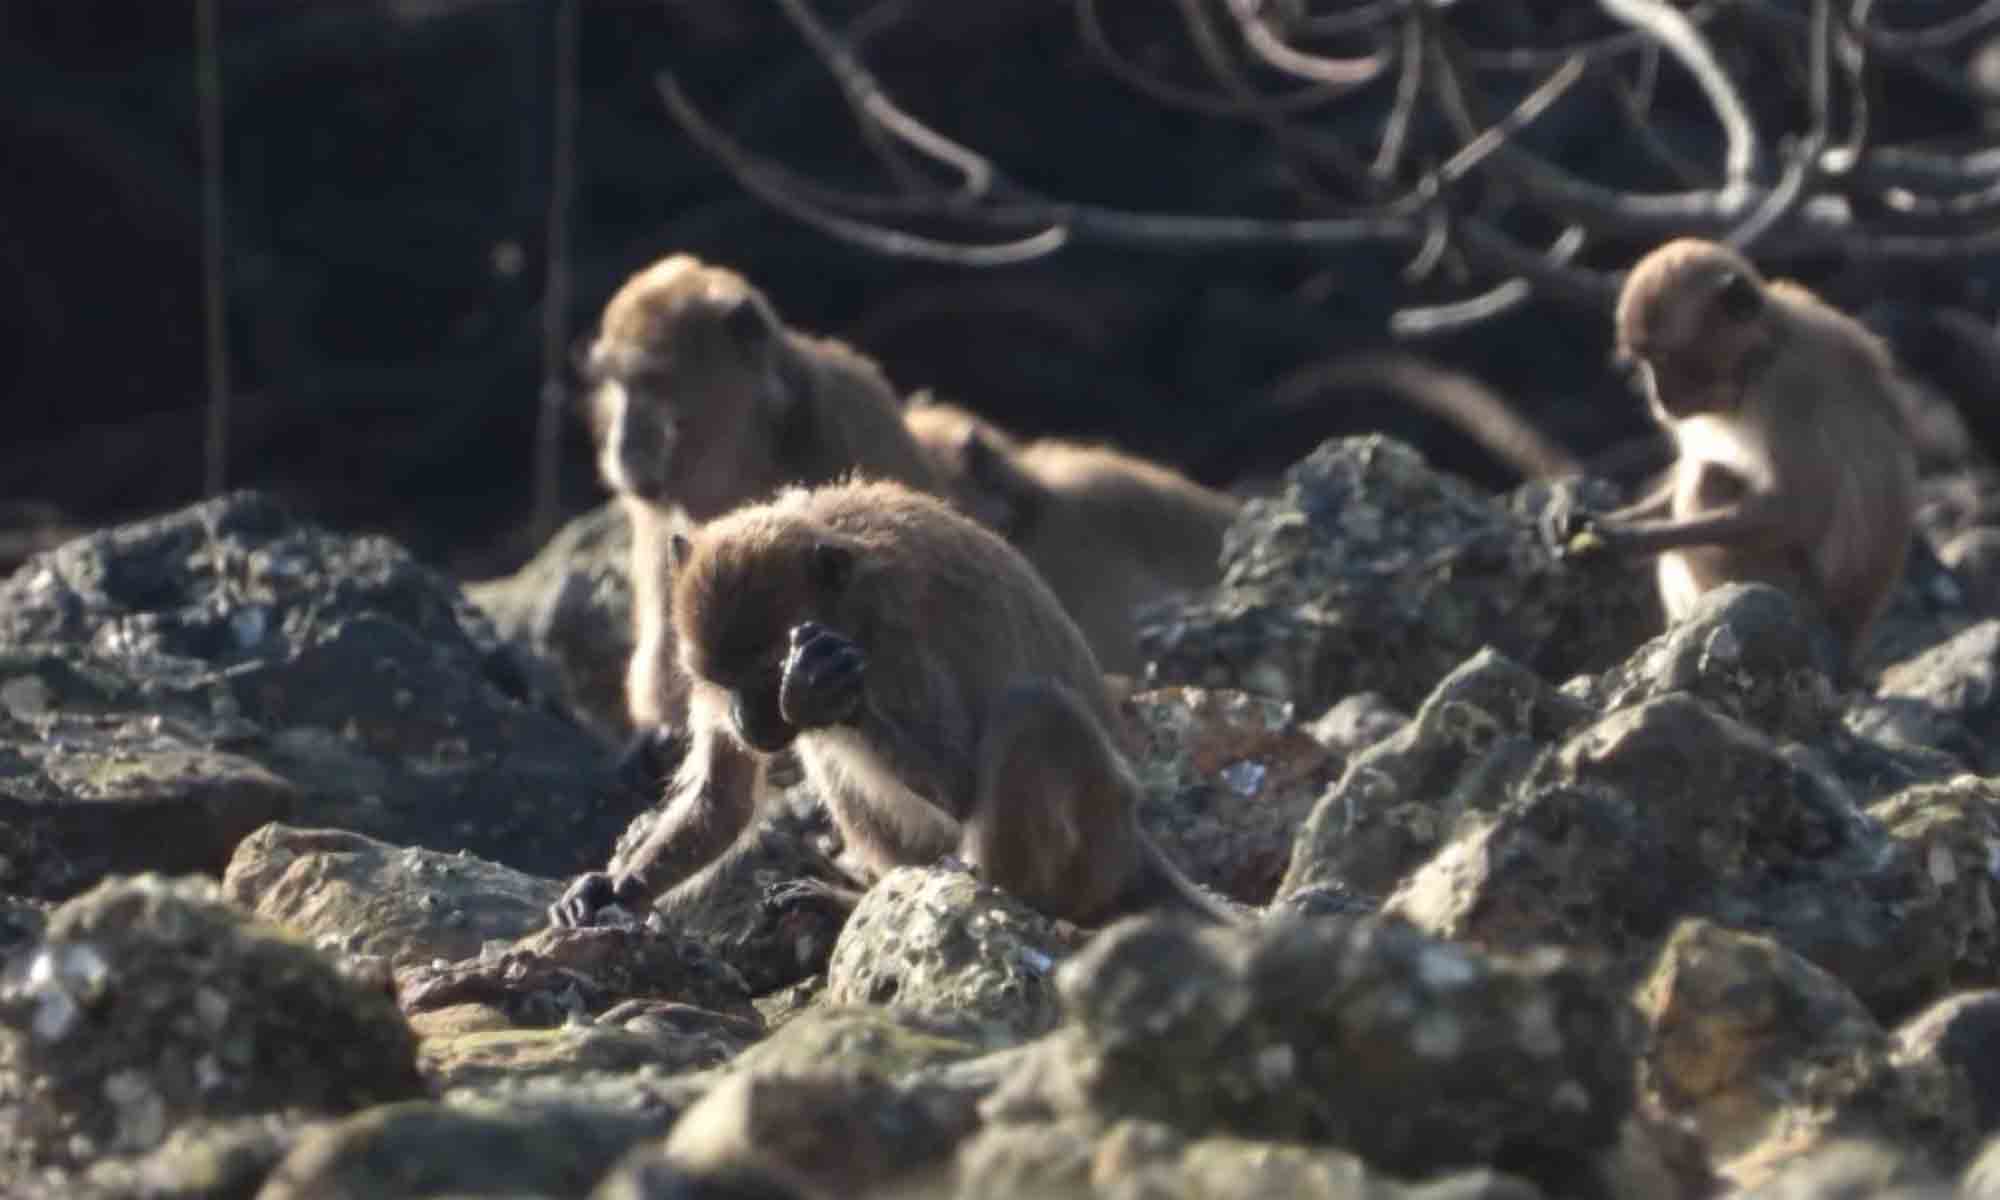 Ancient Stone Age Human Tools Could Have Been Made By Monkeys, Says Study